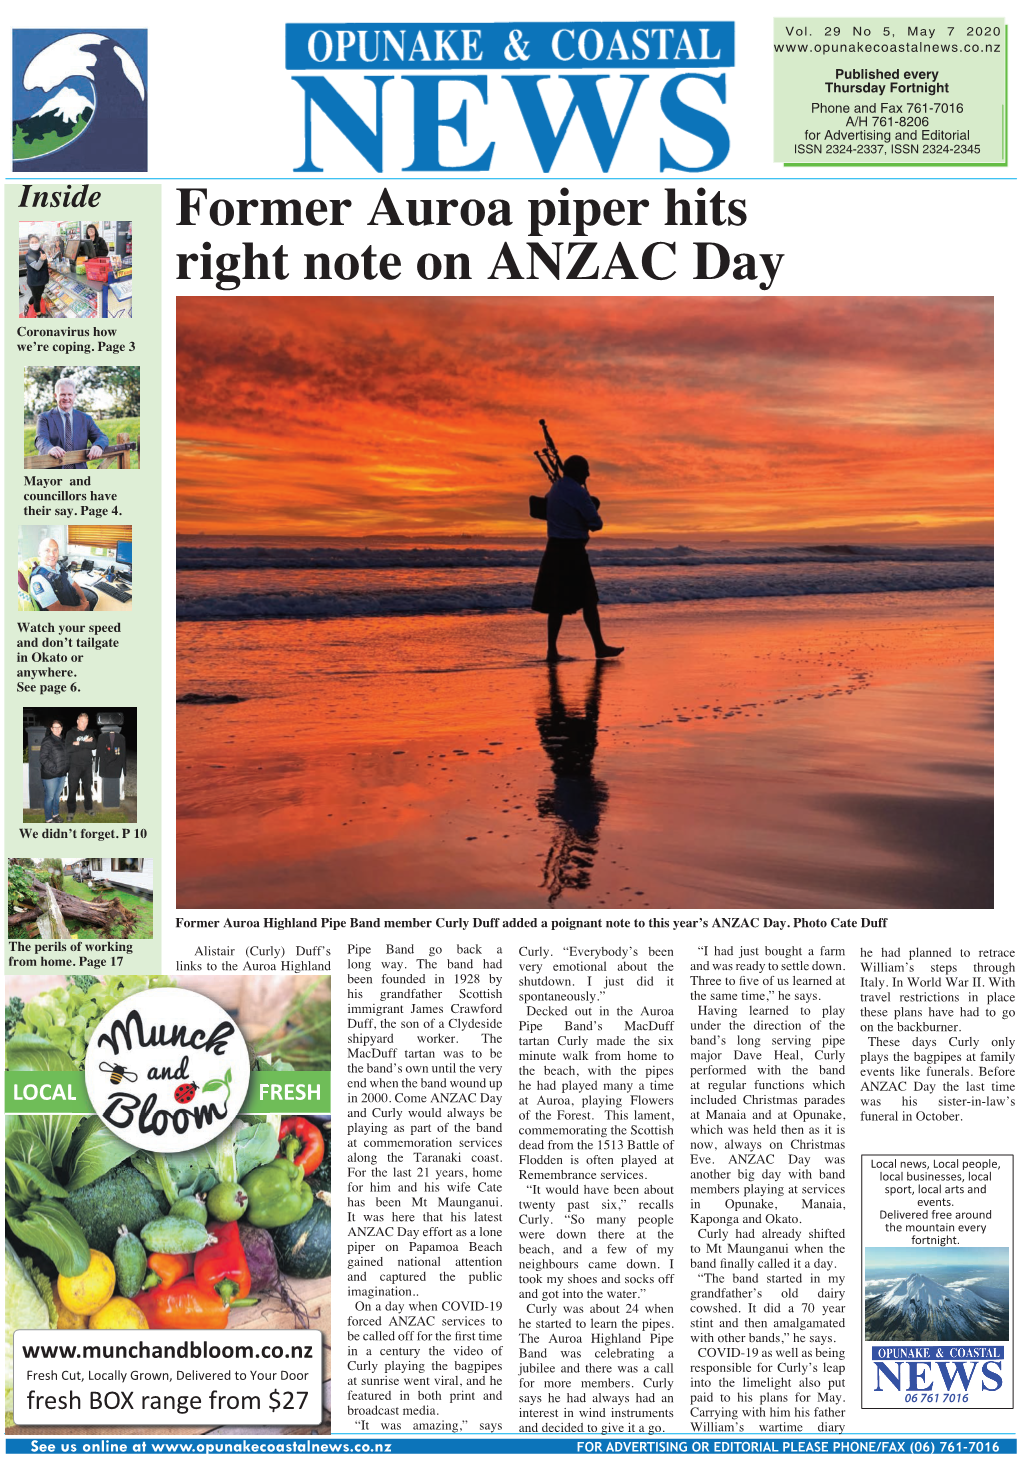 Former Auroa Piper Hits Right Note on ANZAC Day